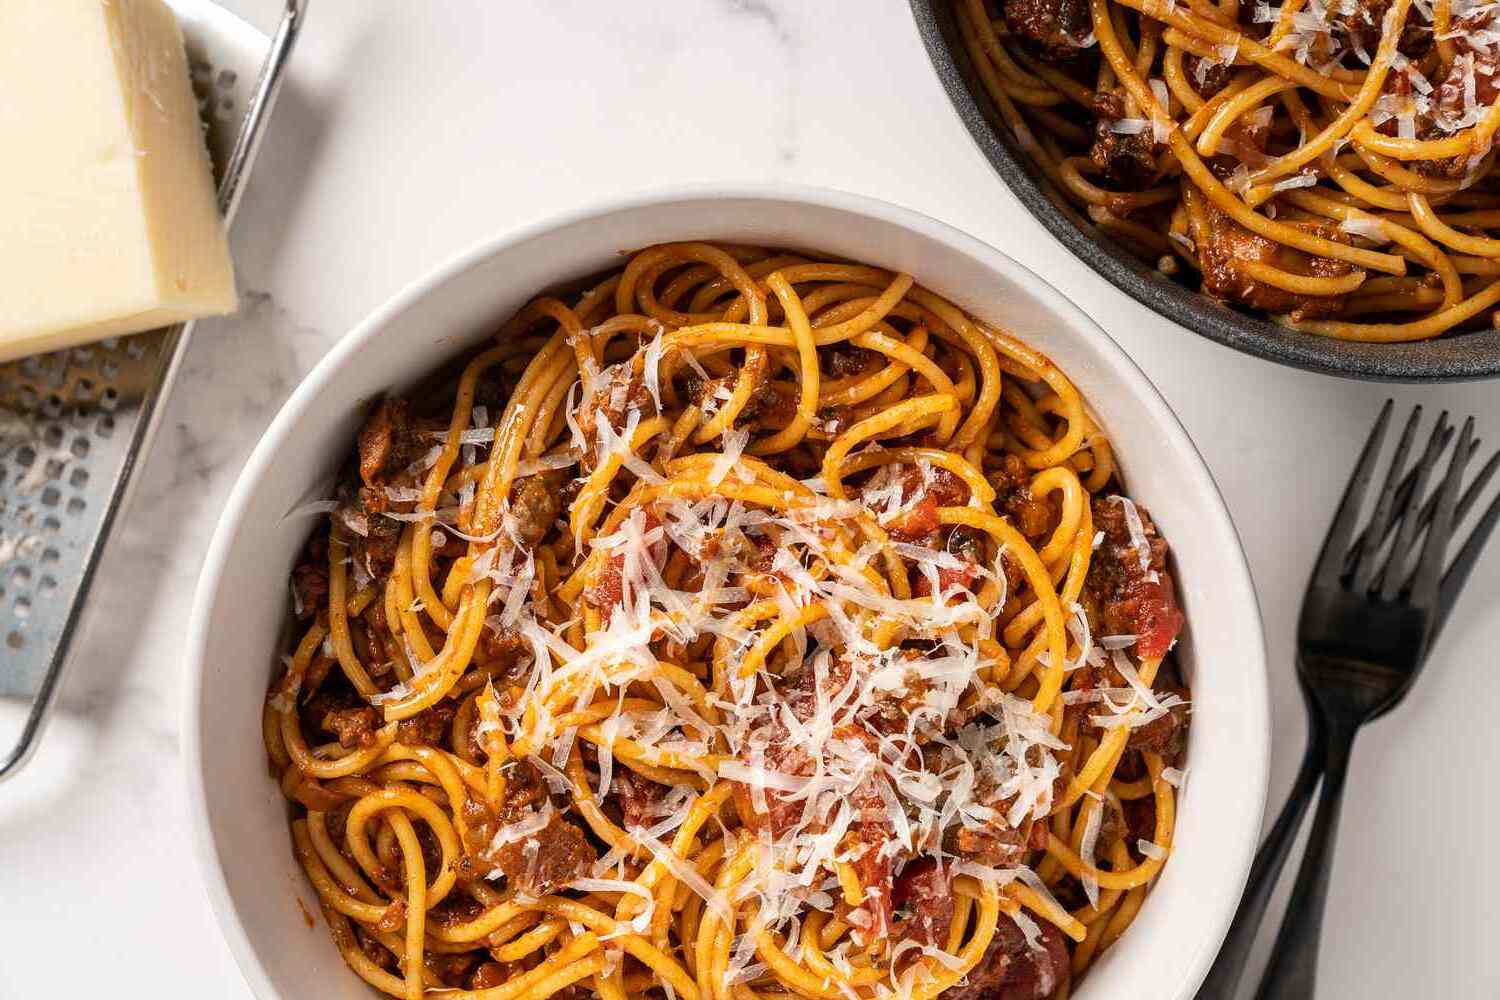 How to Make Spaghetti Bolognese in the Pressure Cooker